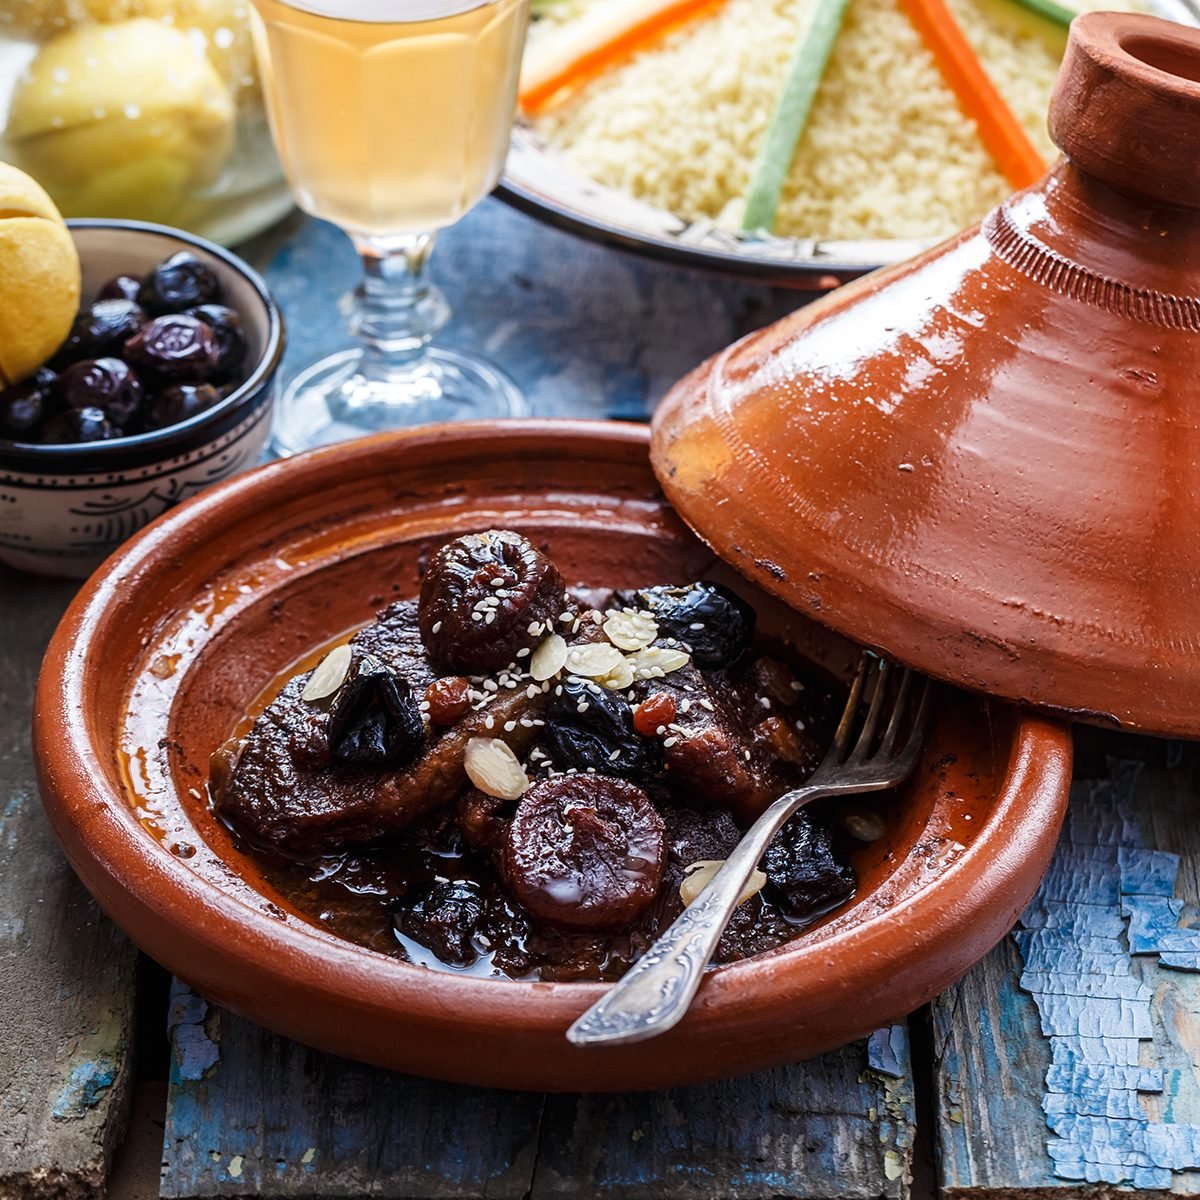 Slow cooked beef with prunes, figs, raisins and almonds - moroccan tajine.